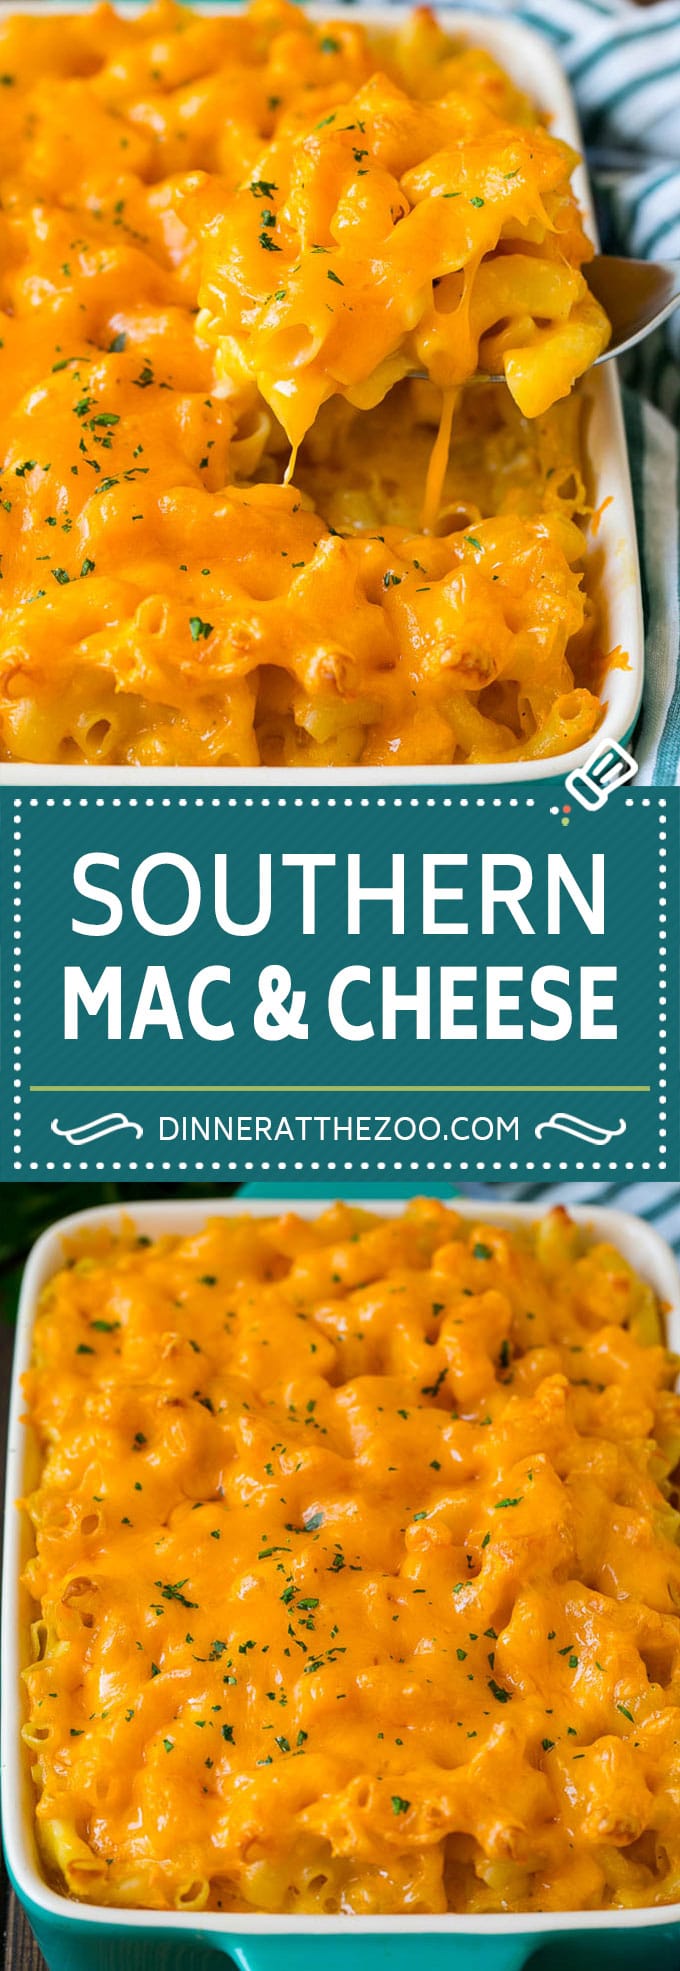 Southern Mac and Cheese | Baked Macaroni and Cheese #pasta #macandcheese #dinner #comfortfood #cheese #dinneratthezoo